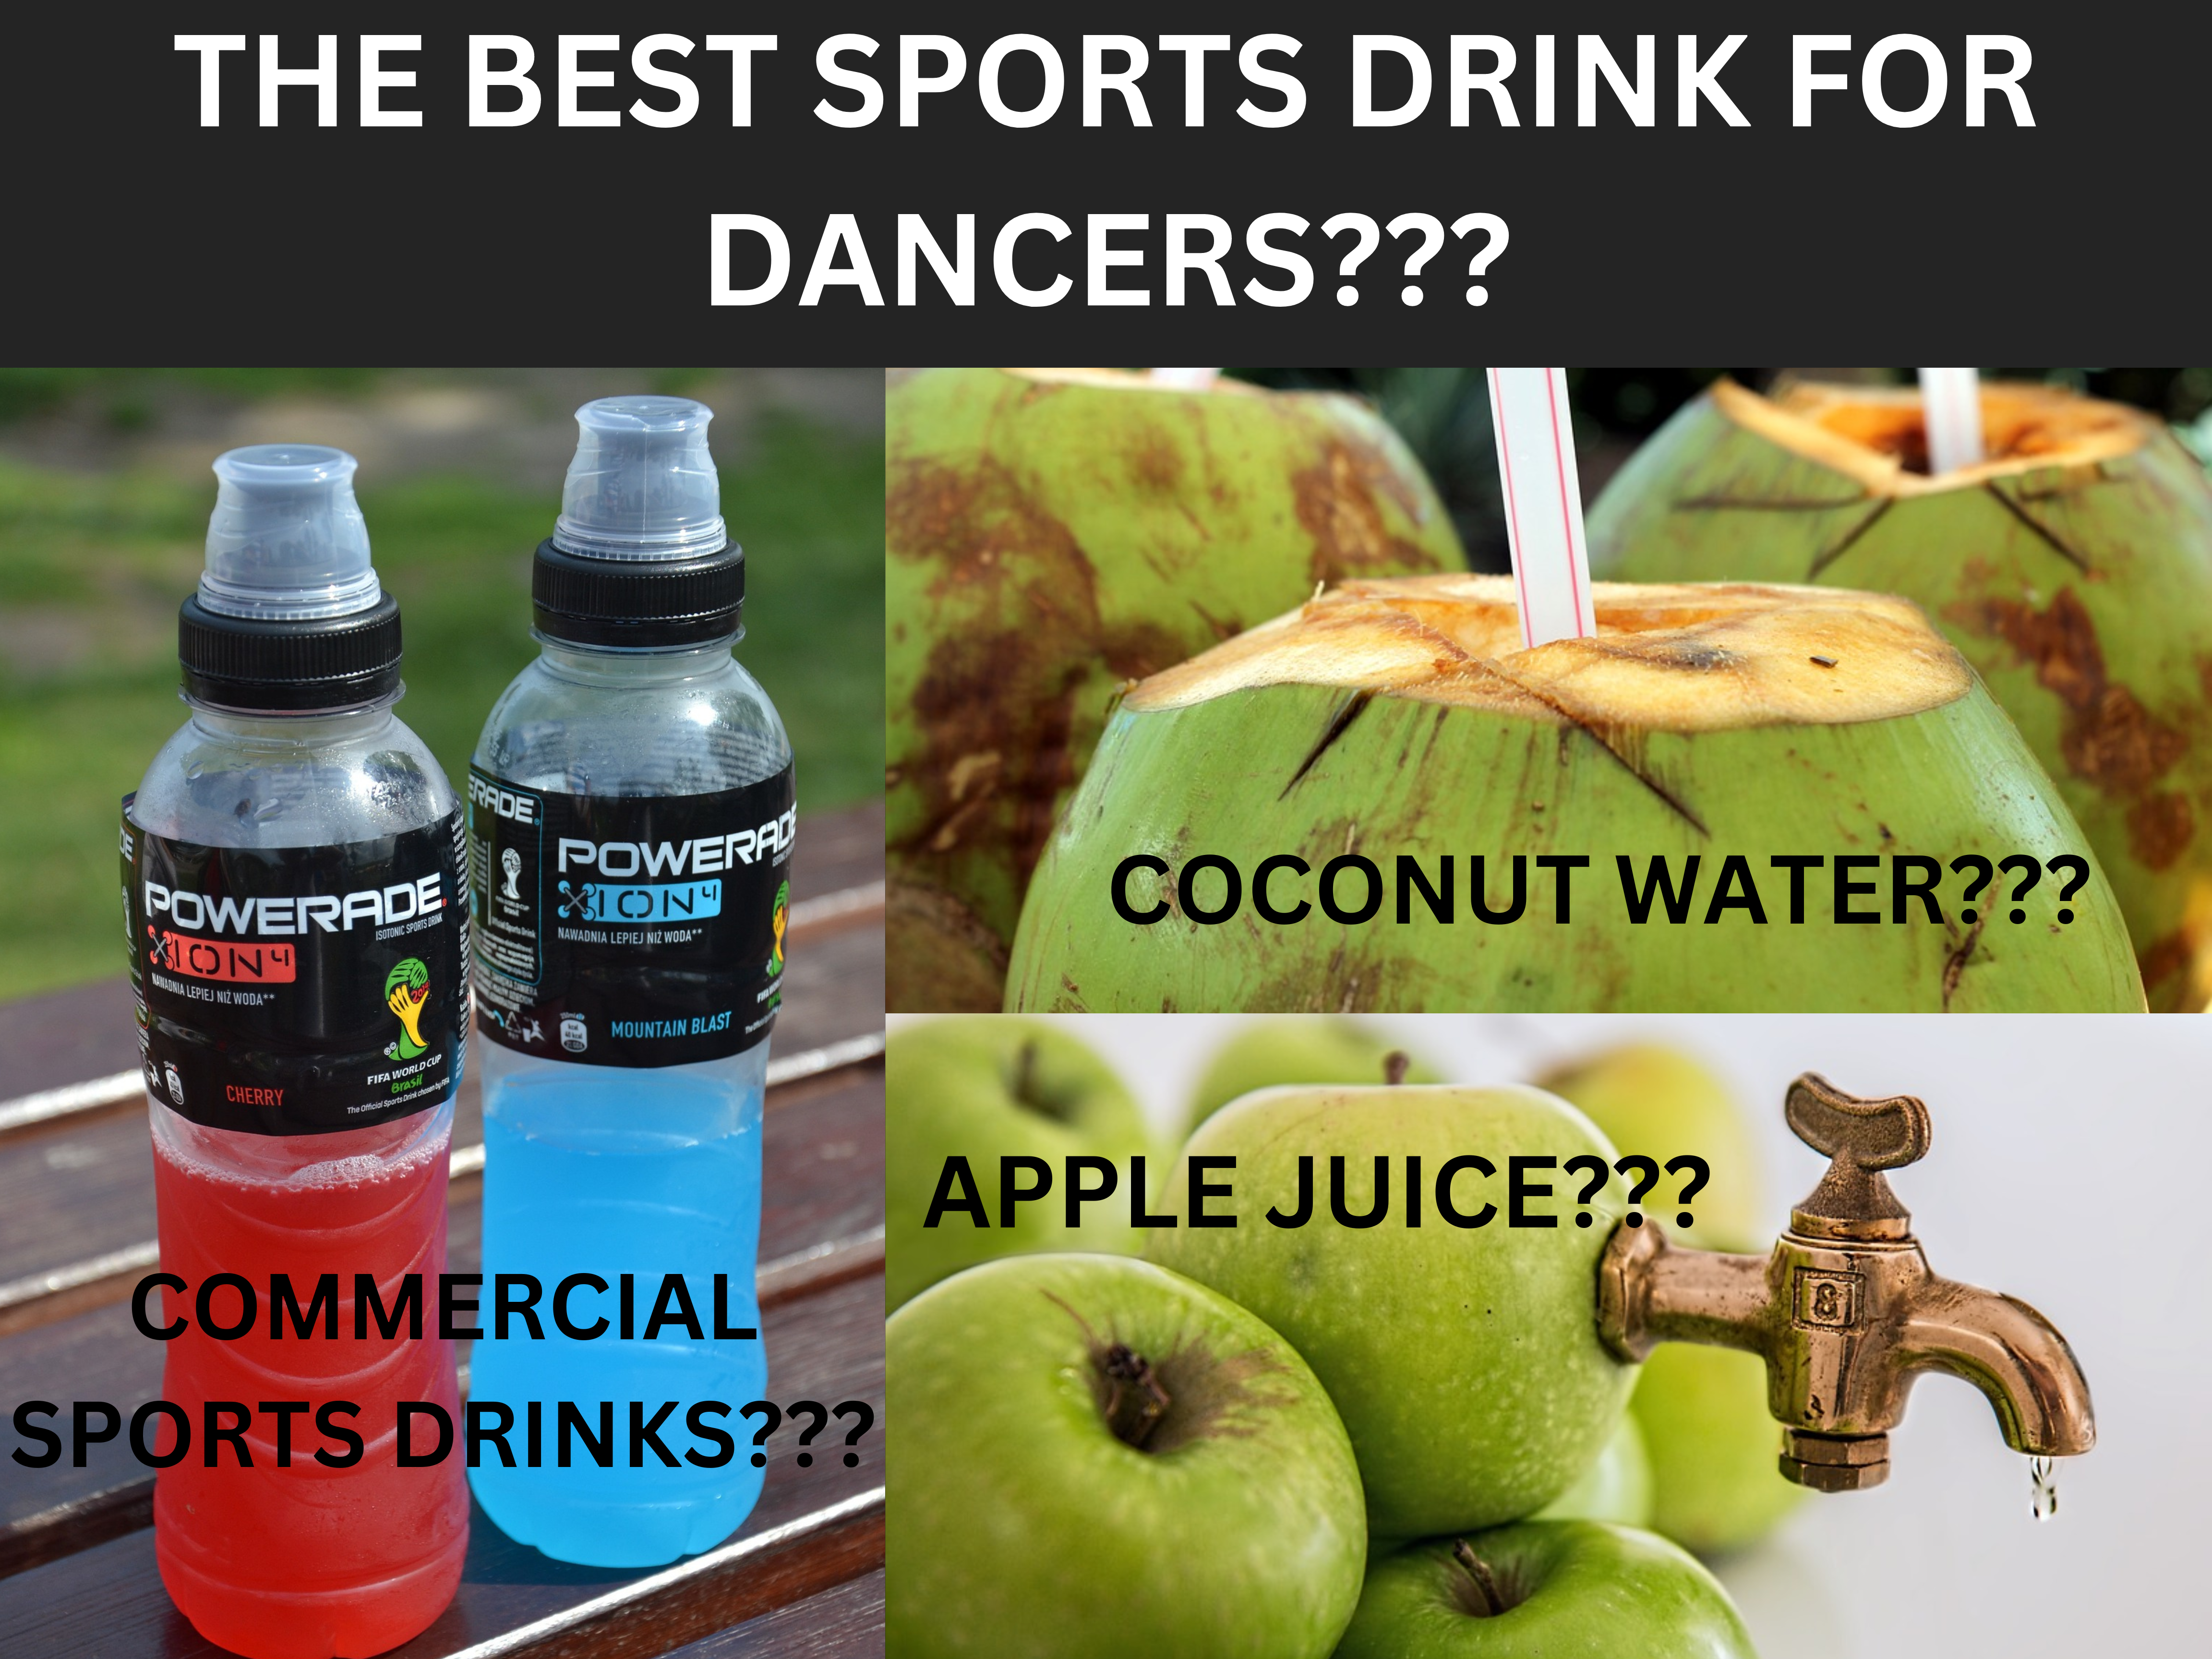 The Best Sports Drinks for Dancers